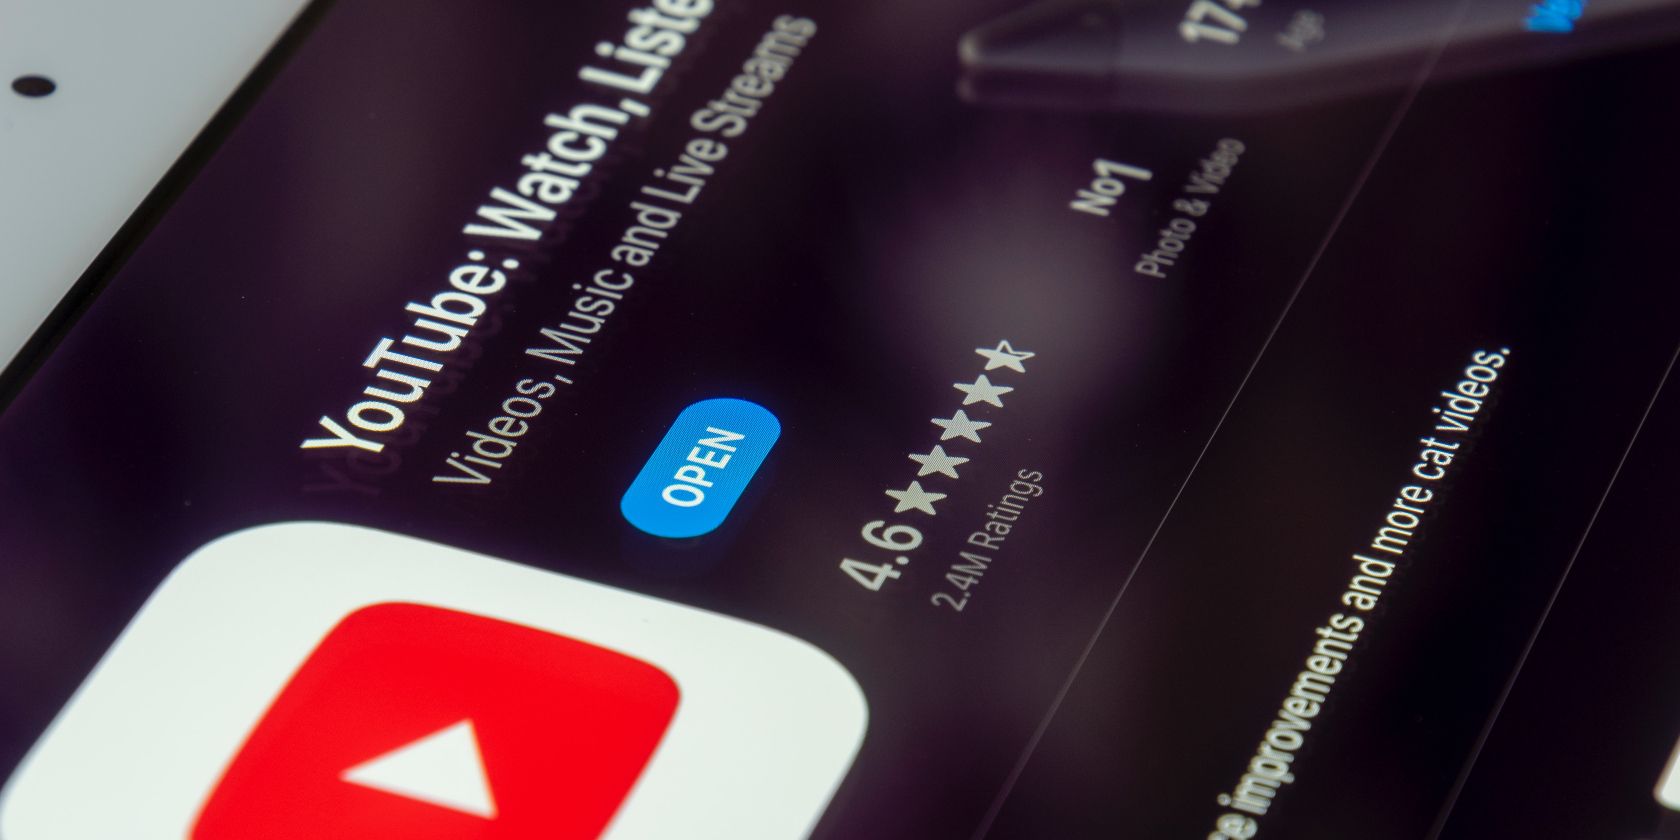 How to Make Your First Ever YouTube Video: A Step-by-Step Guide